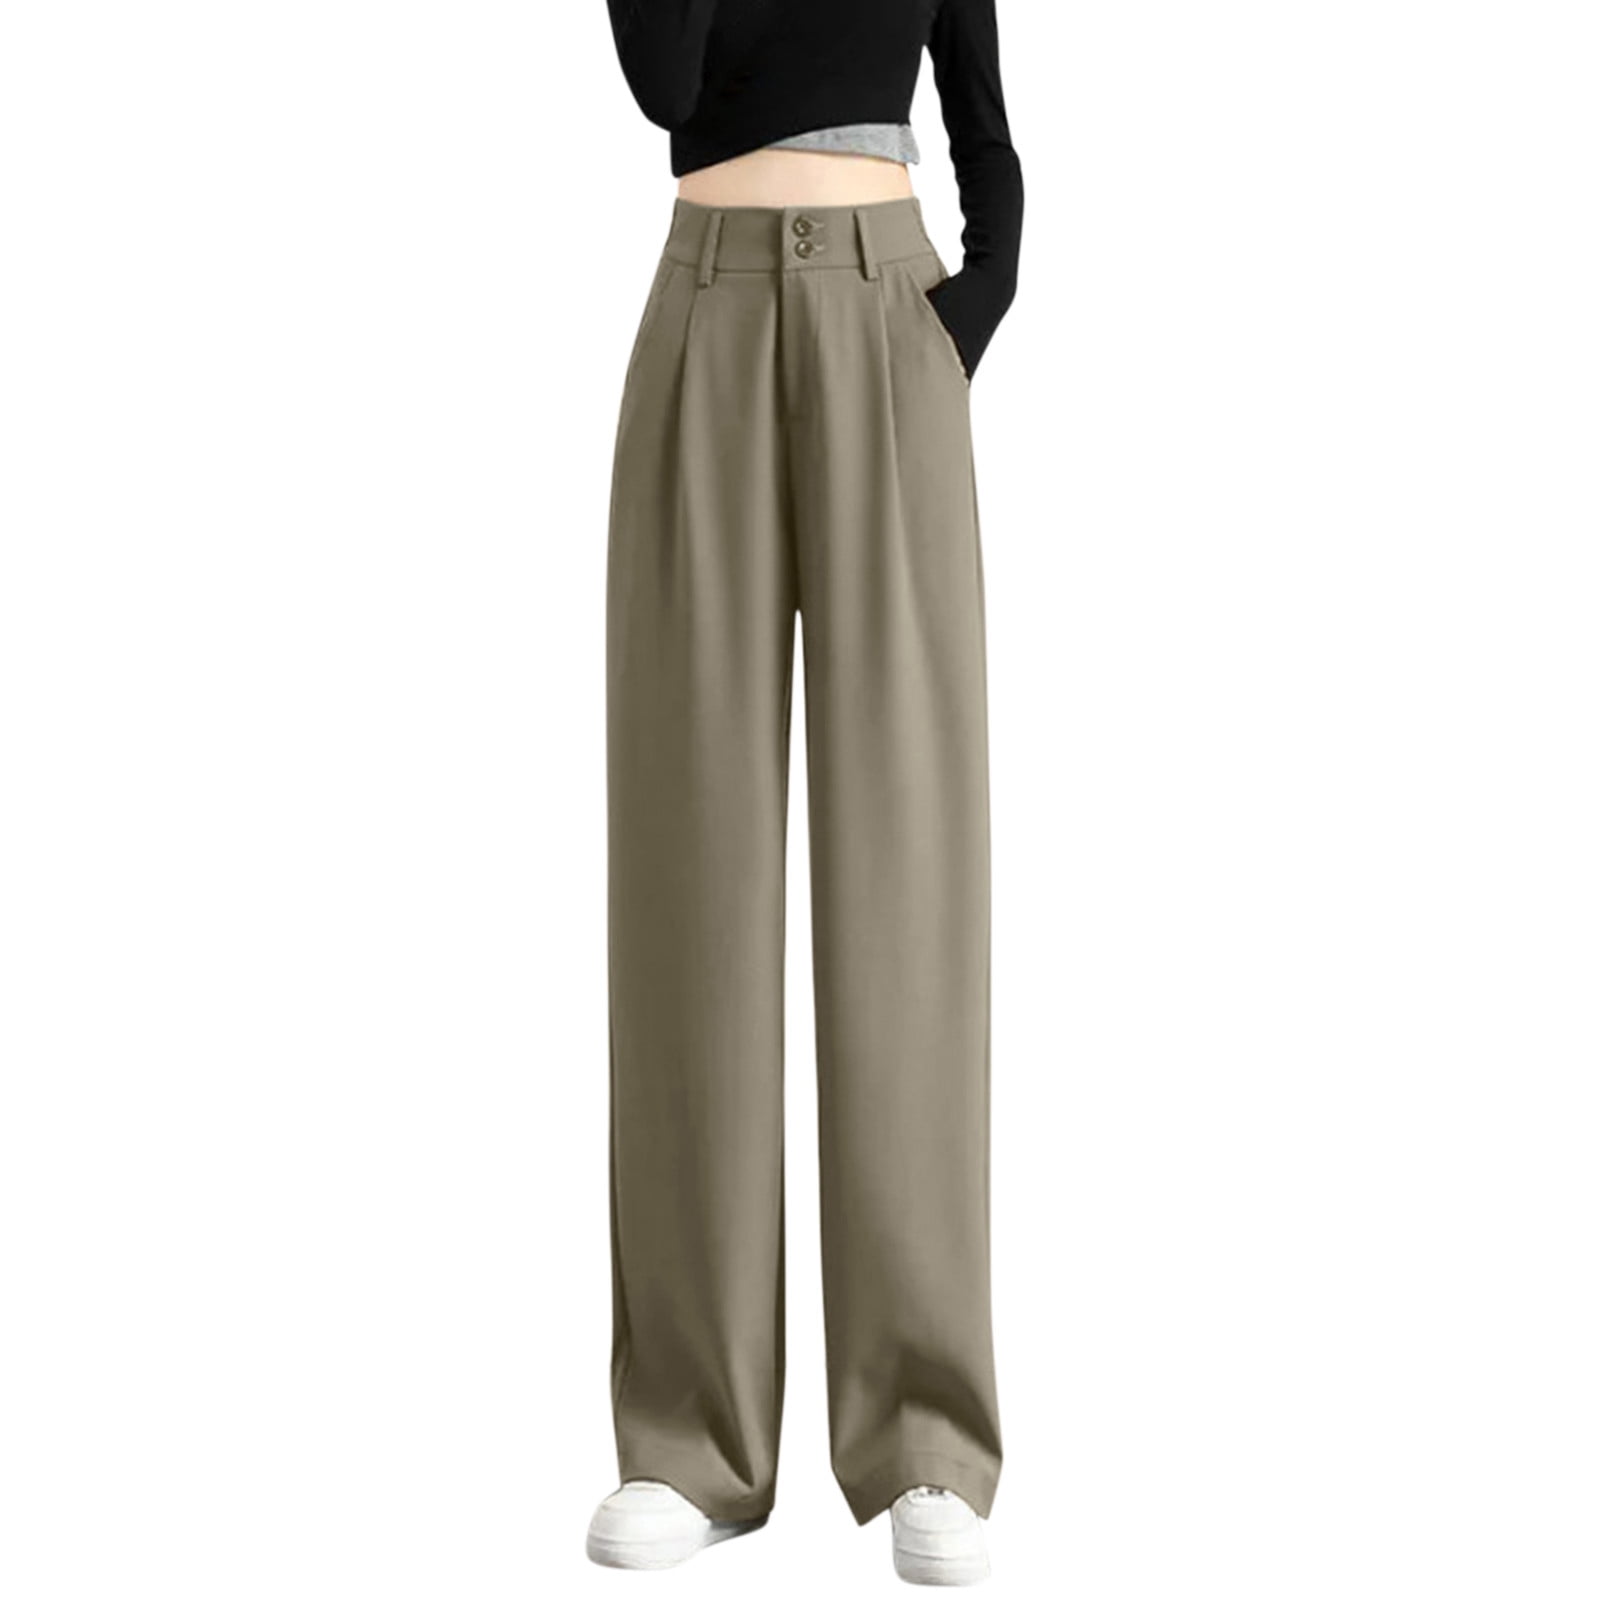 Outfmvch women's pants Wide Leg High Elastic Waisted In The Back ...